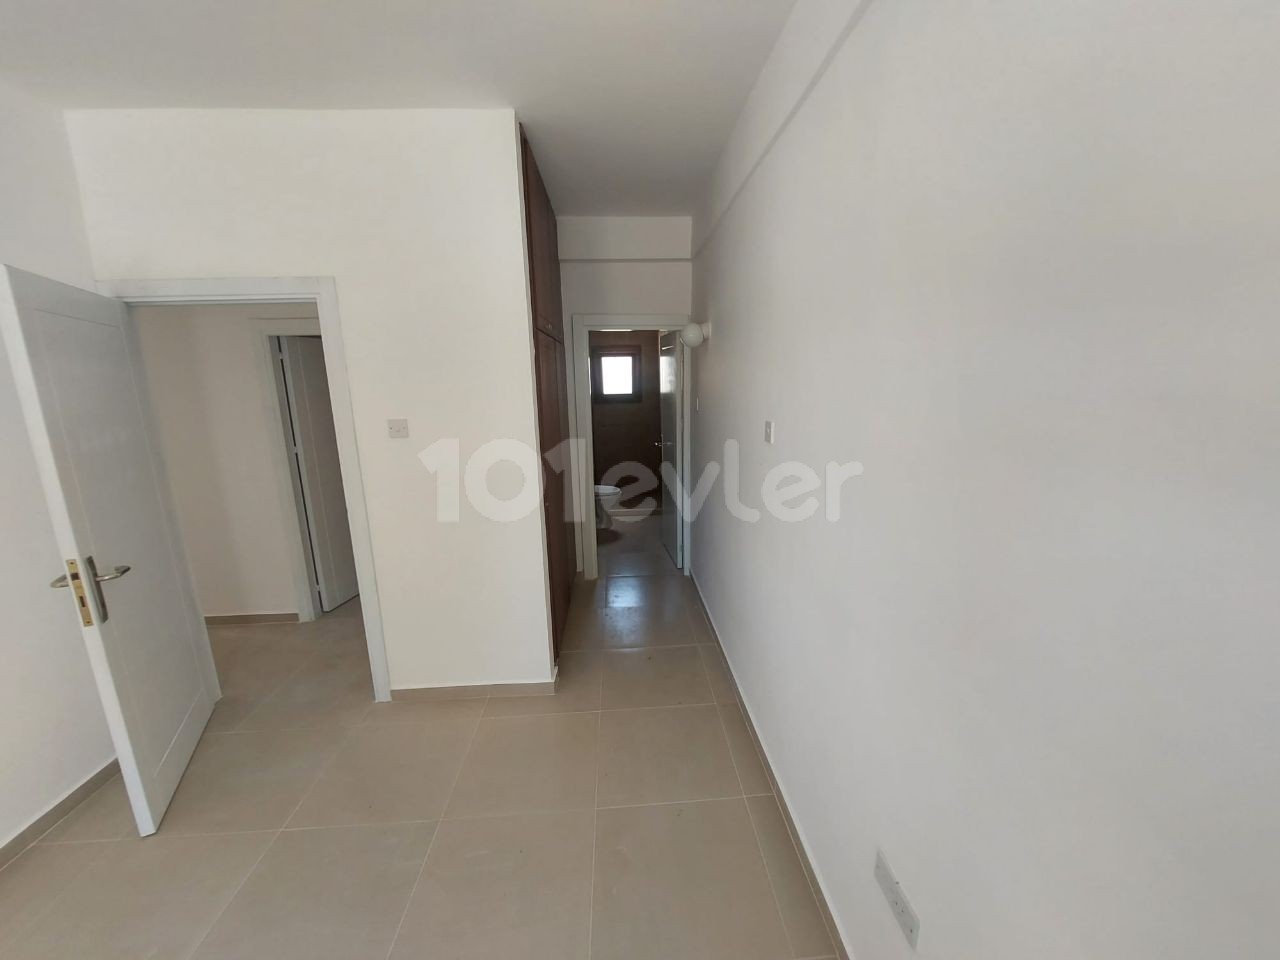 GROUND FLOOR FLAT WITH POOL FOR SALE IN ESENTEPE